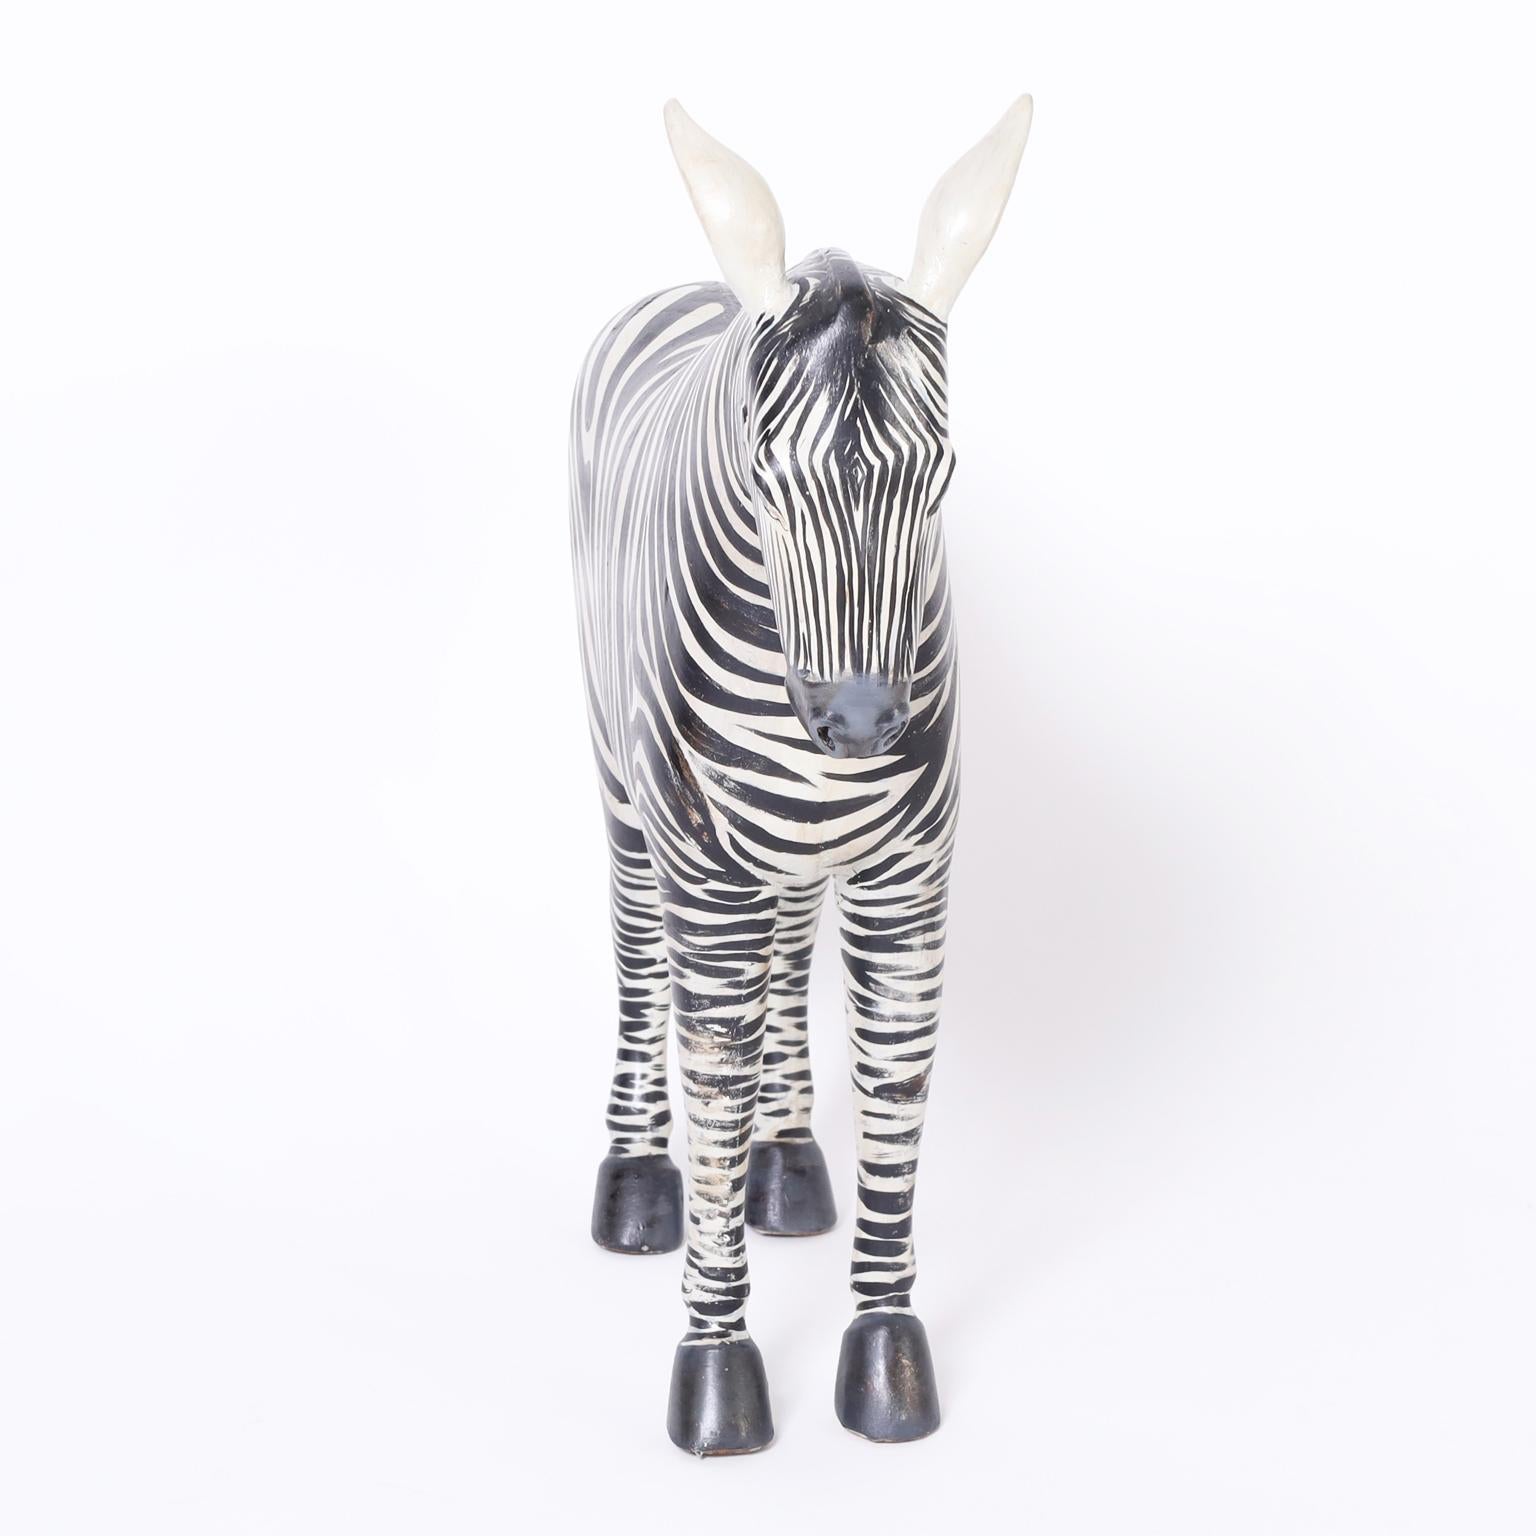 American Pair of Carved and Painted Zebra Figures